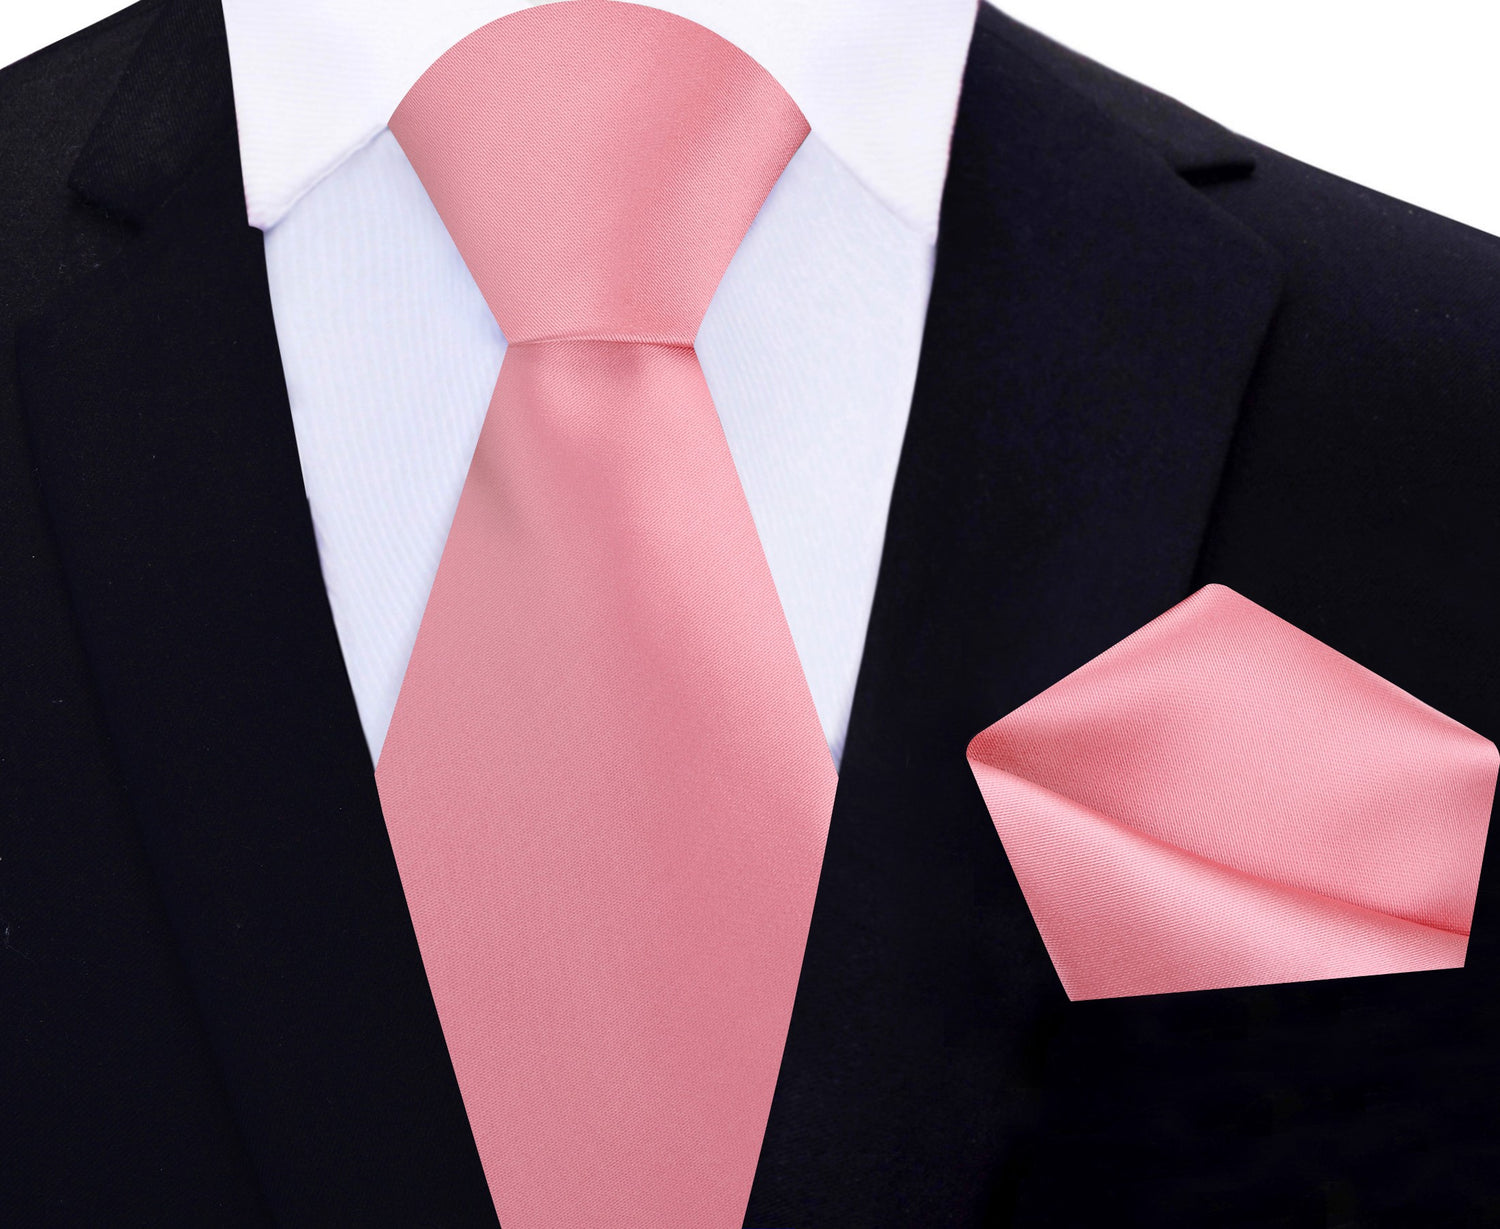 Main View: Solid Glossy Salmon Pink Tie and Pocket Square